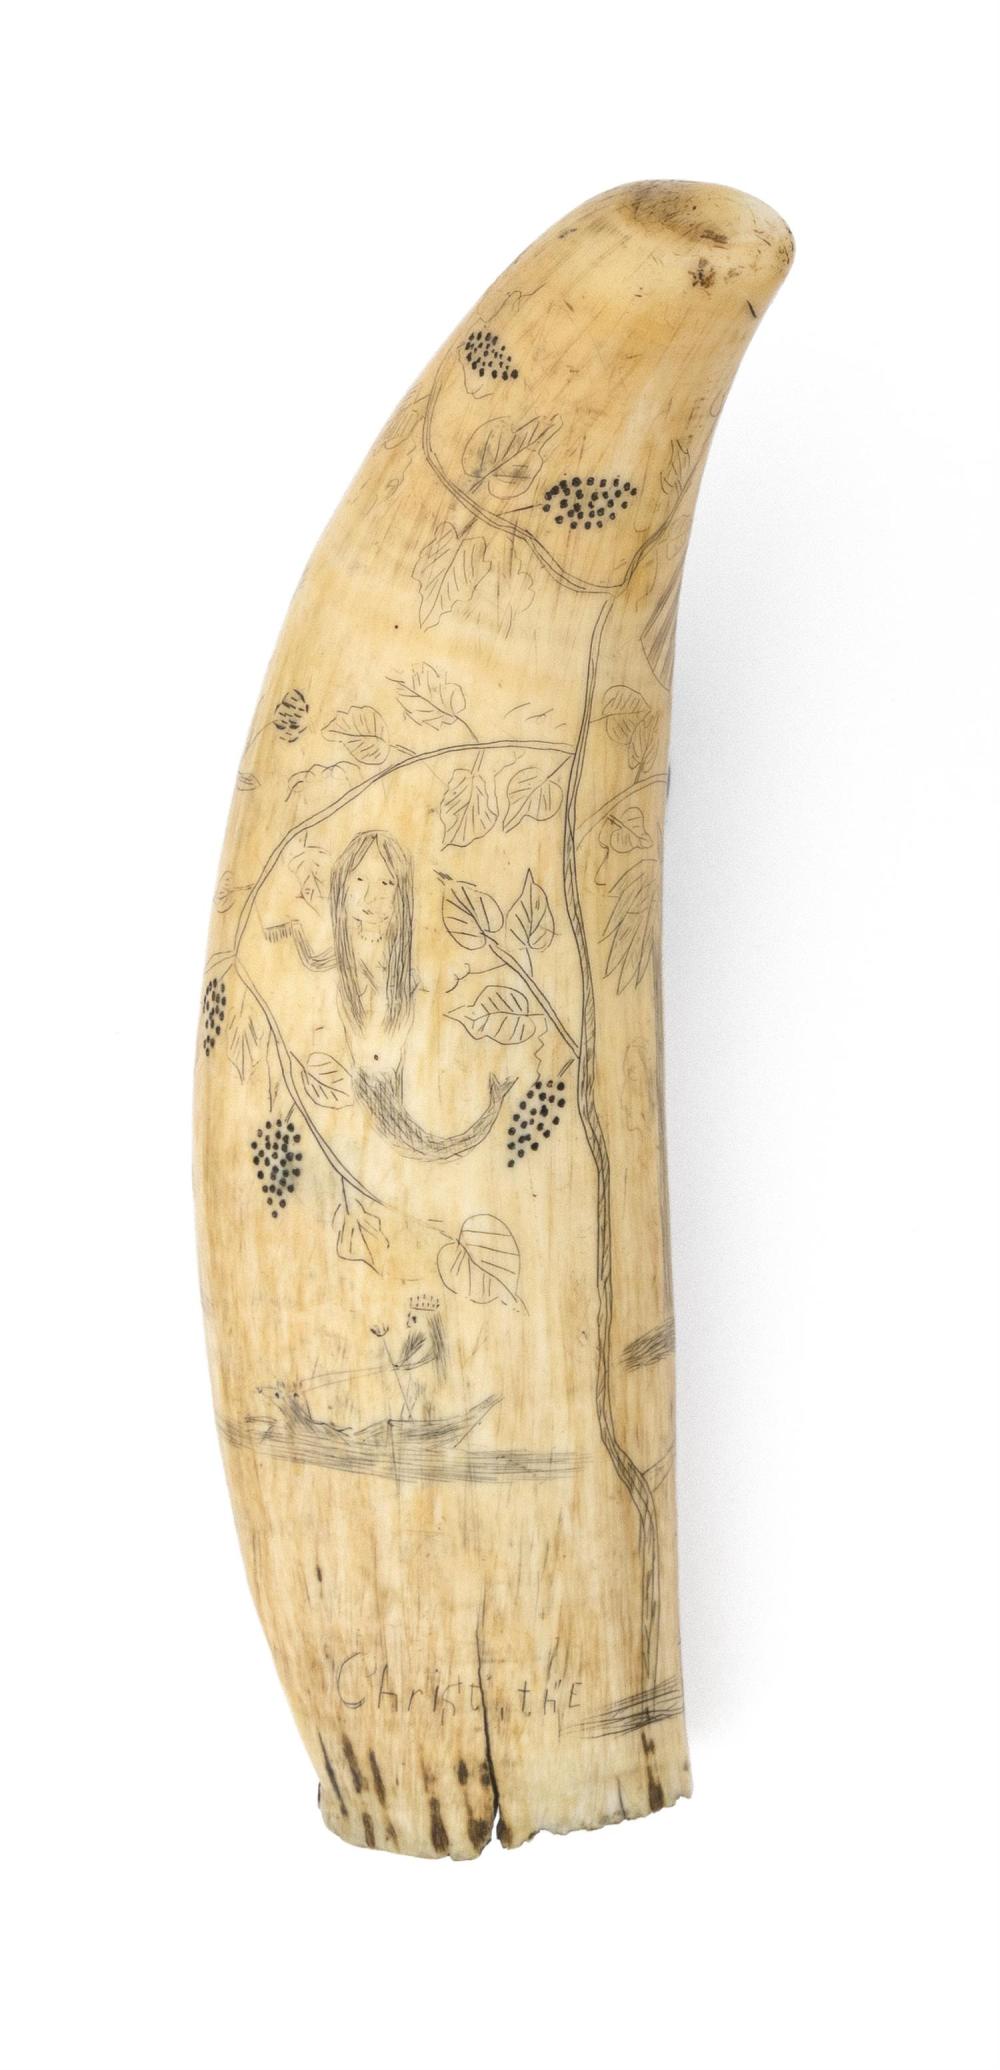 SCRIMSHAW WHALE'S TOOTH WITH ALLEGORICAL